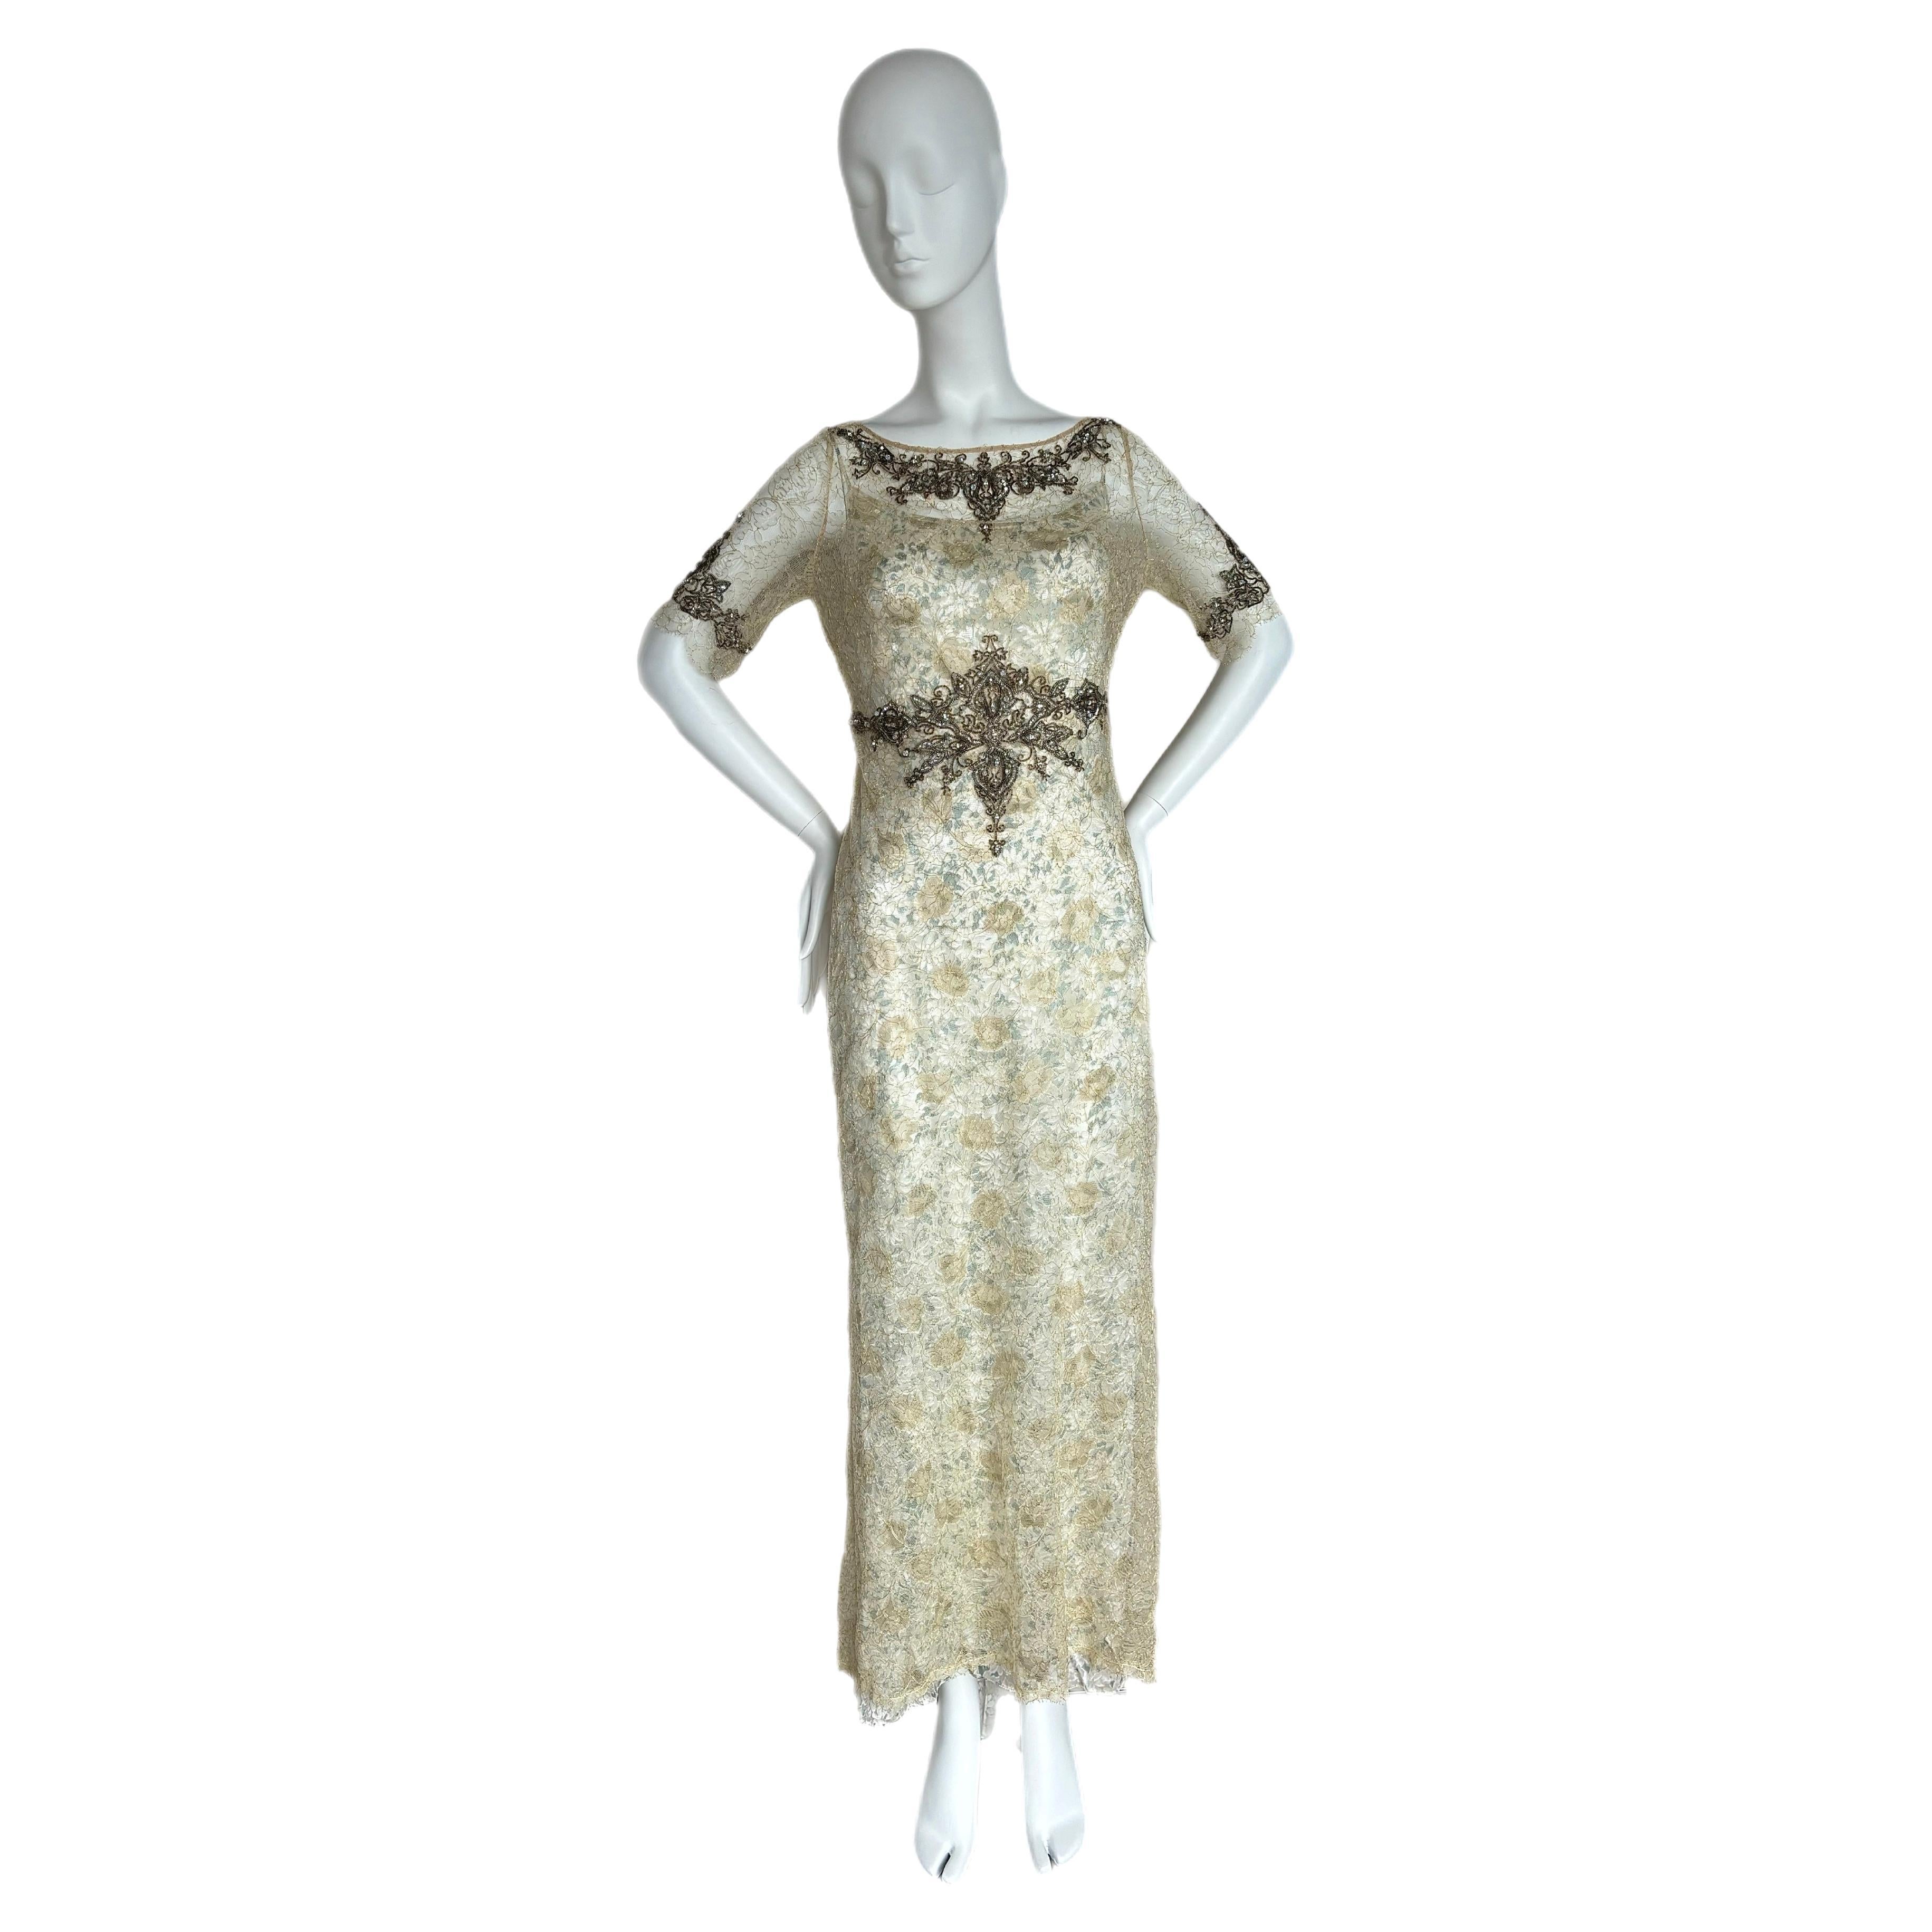 BADGLEY MISCHKA Vintage Slip Gown w. Delicate Lace Embellished Overlay Maxi  For Sale